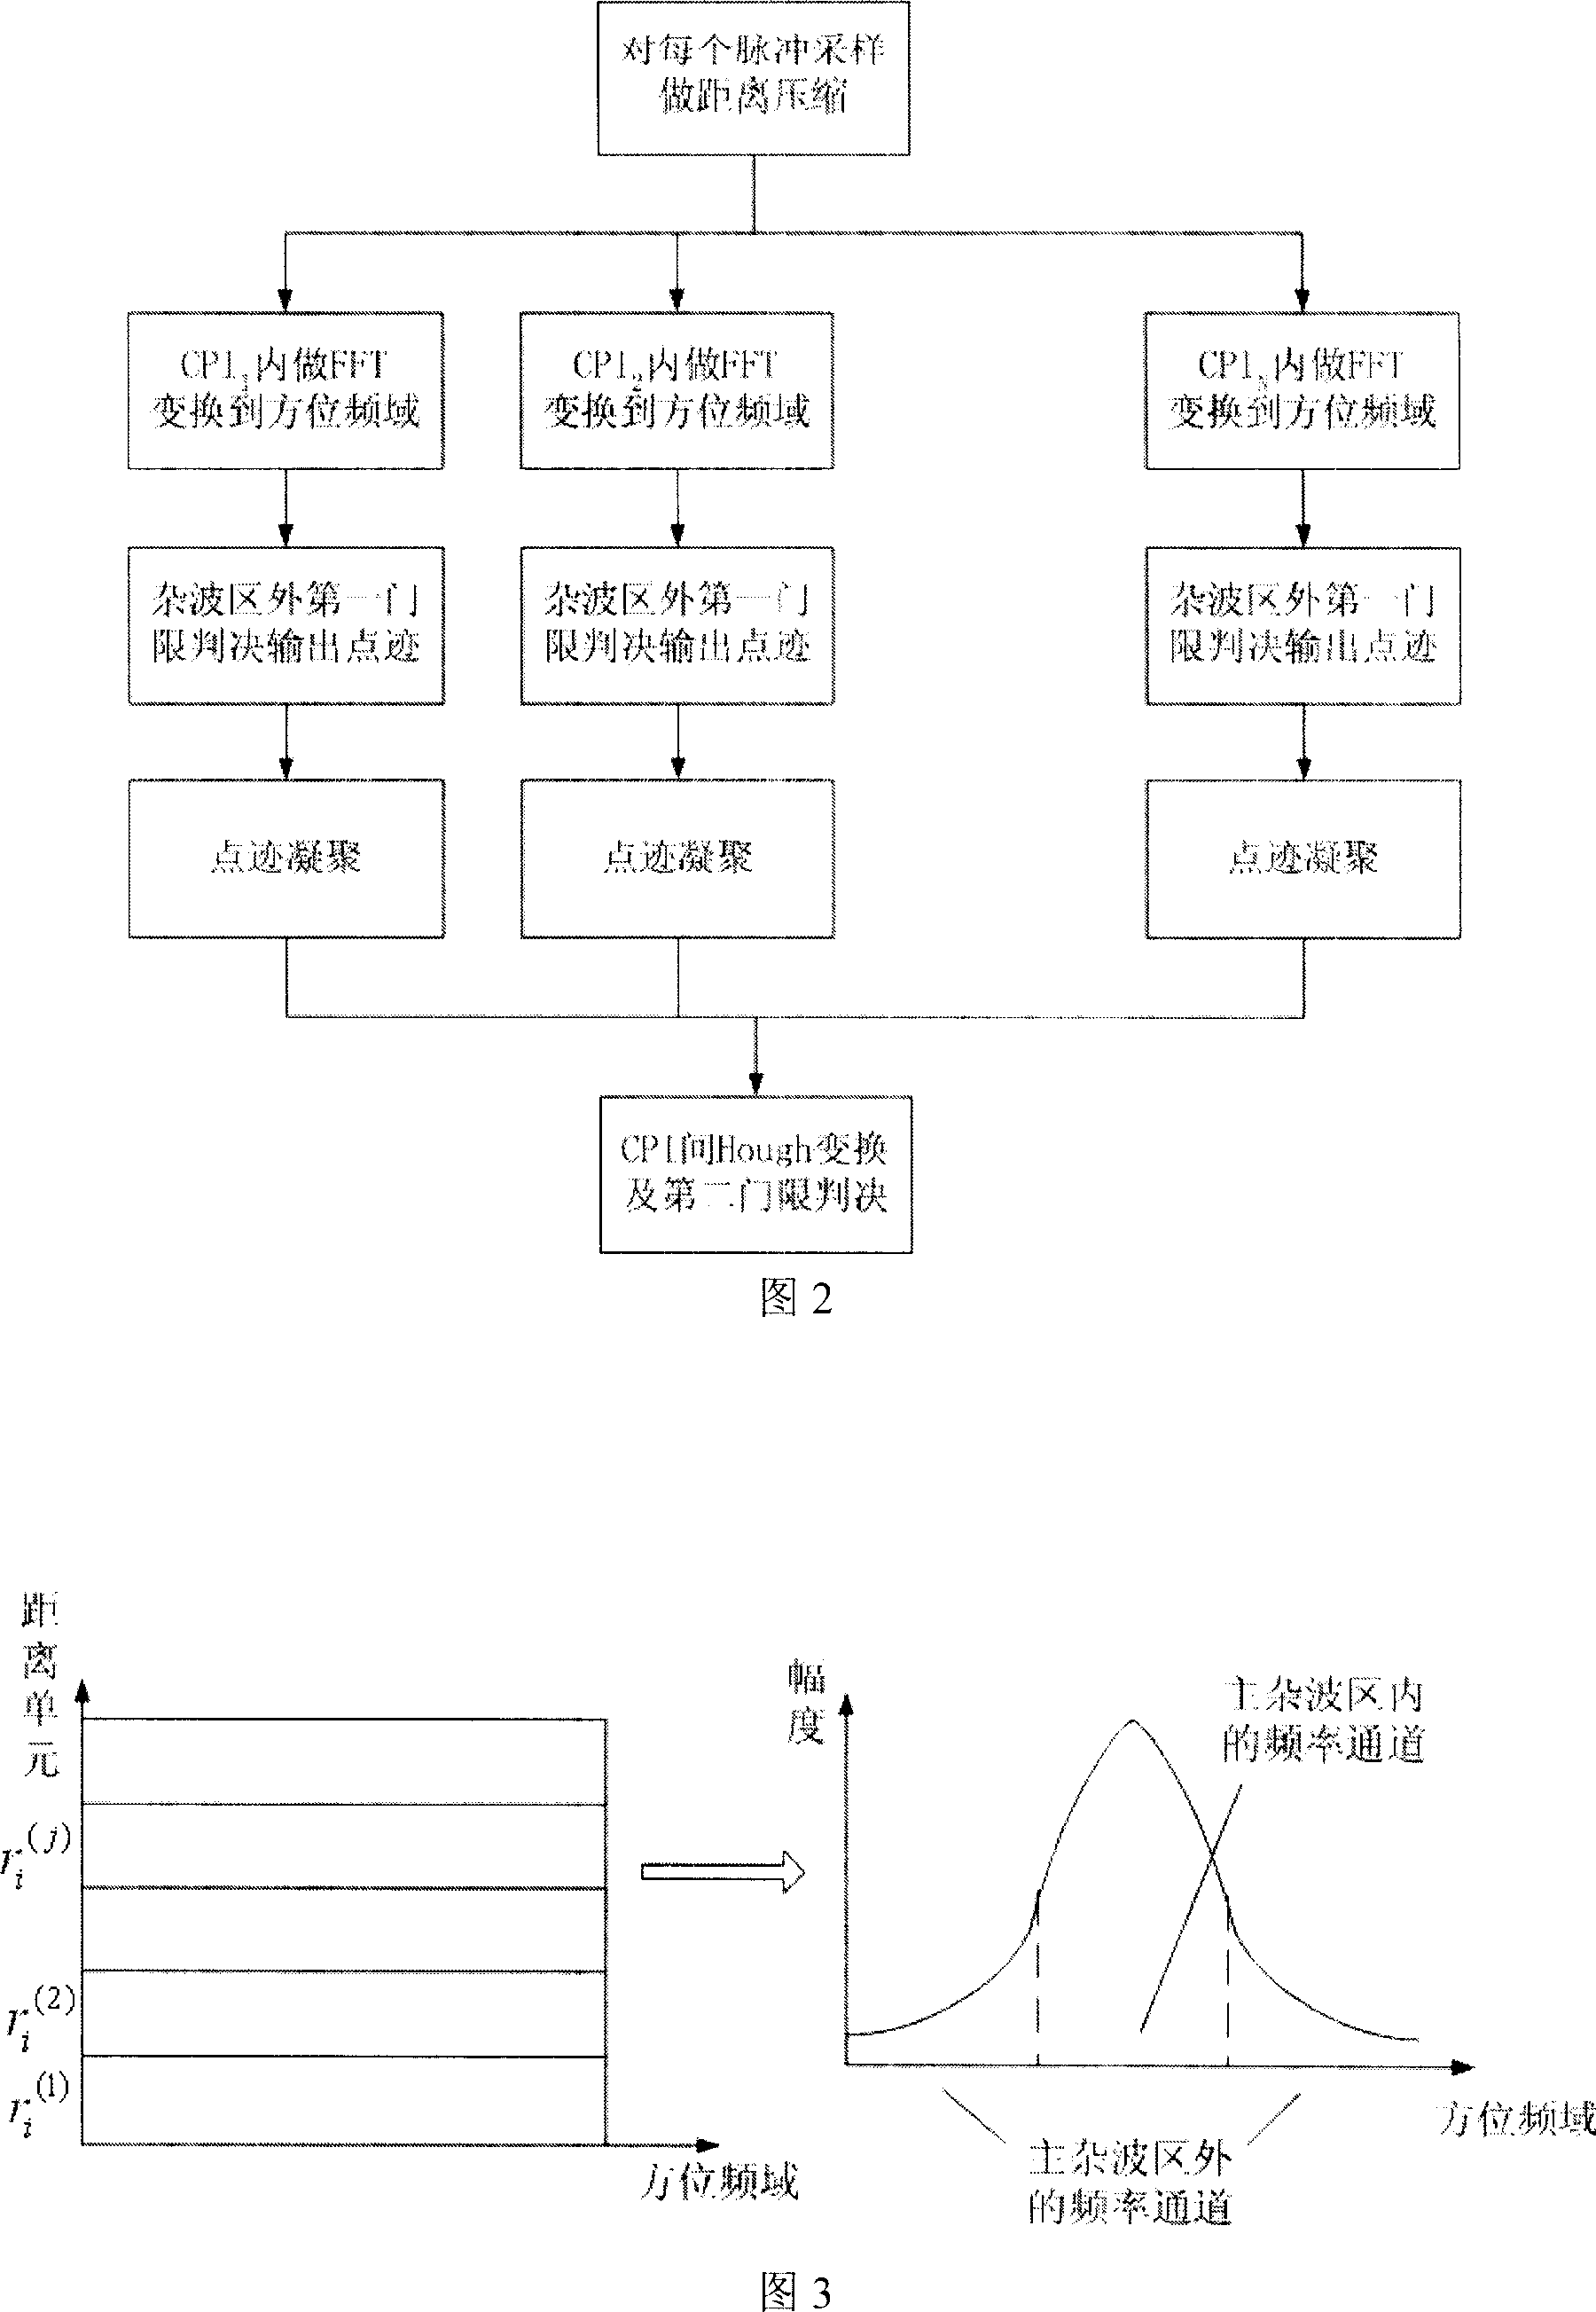 Double-threshold constant false alurm motion target detecting method of double base synthetic aperture radar